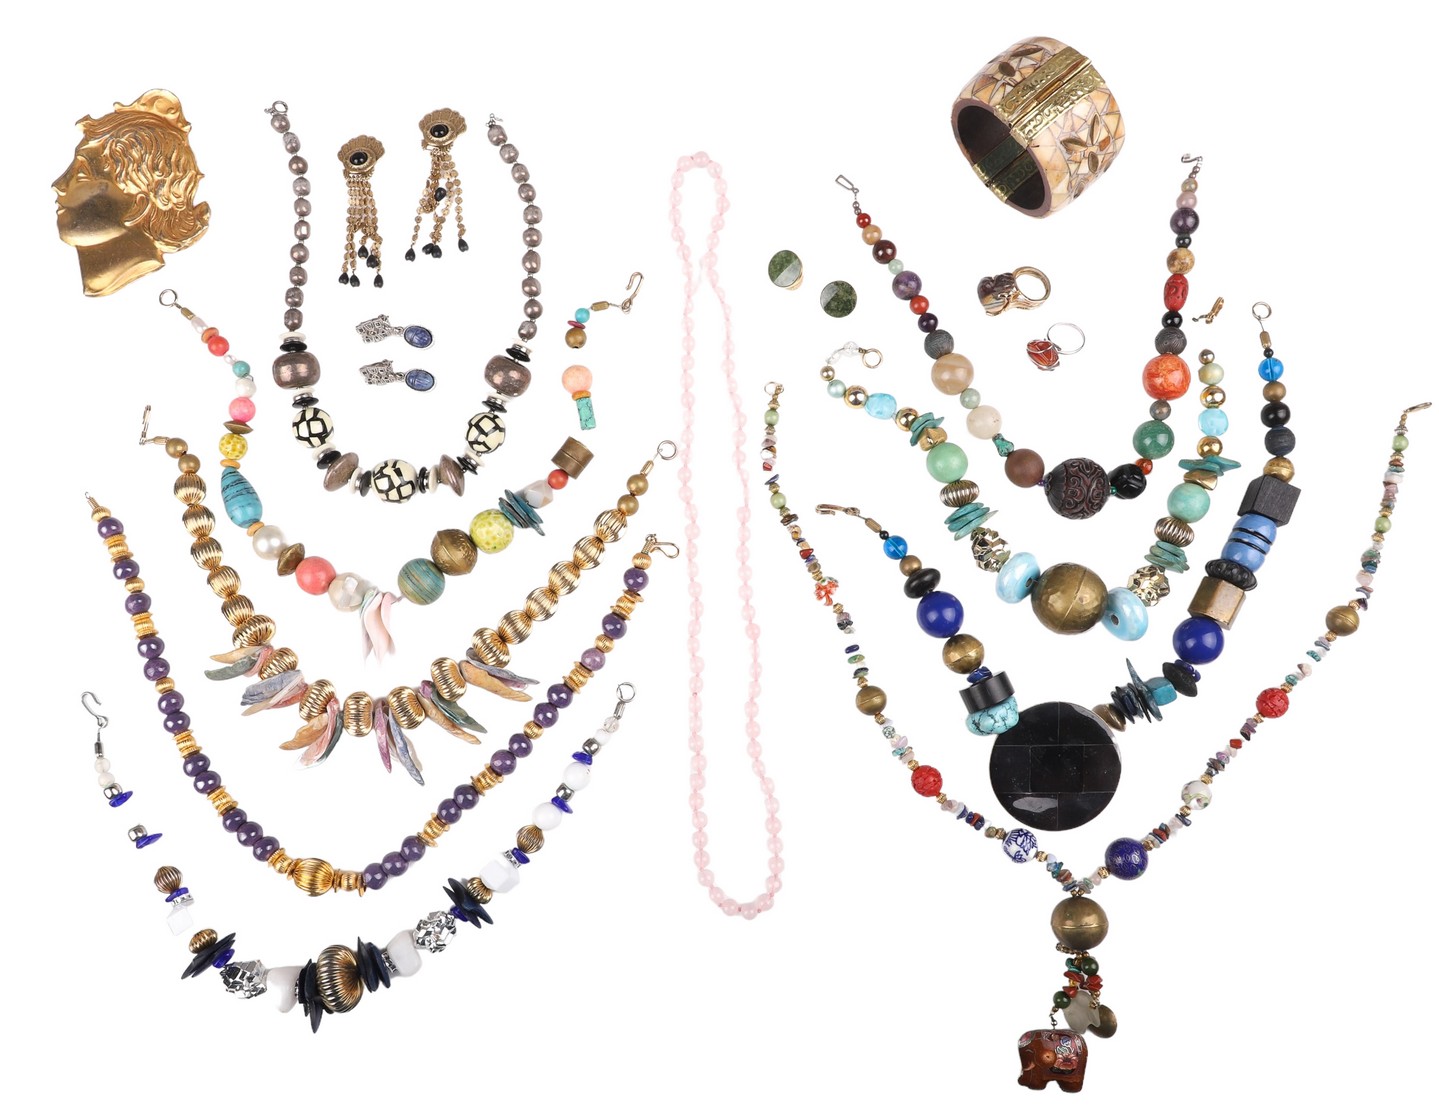 Eclectic costume jewelry grouping 317dbf